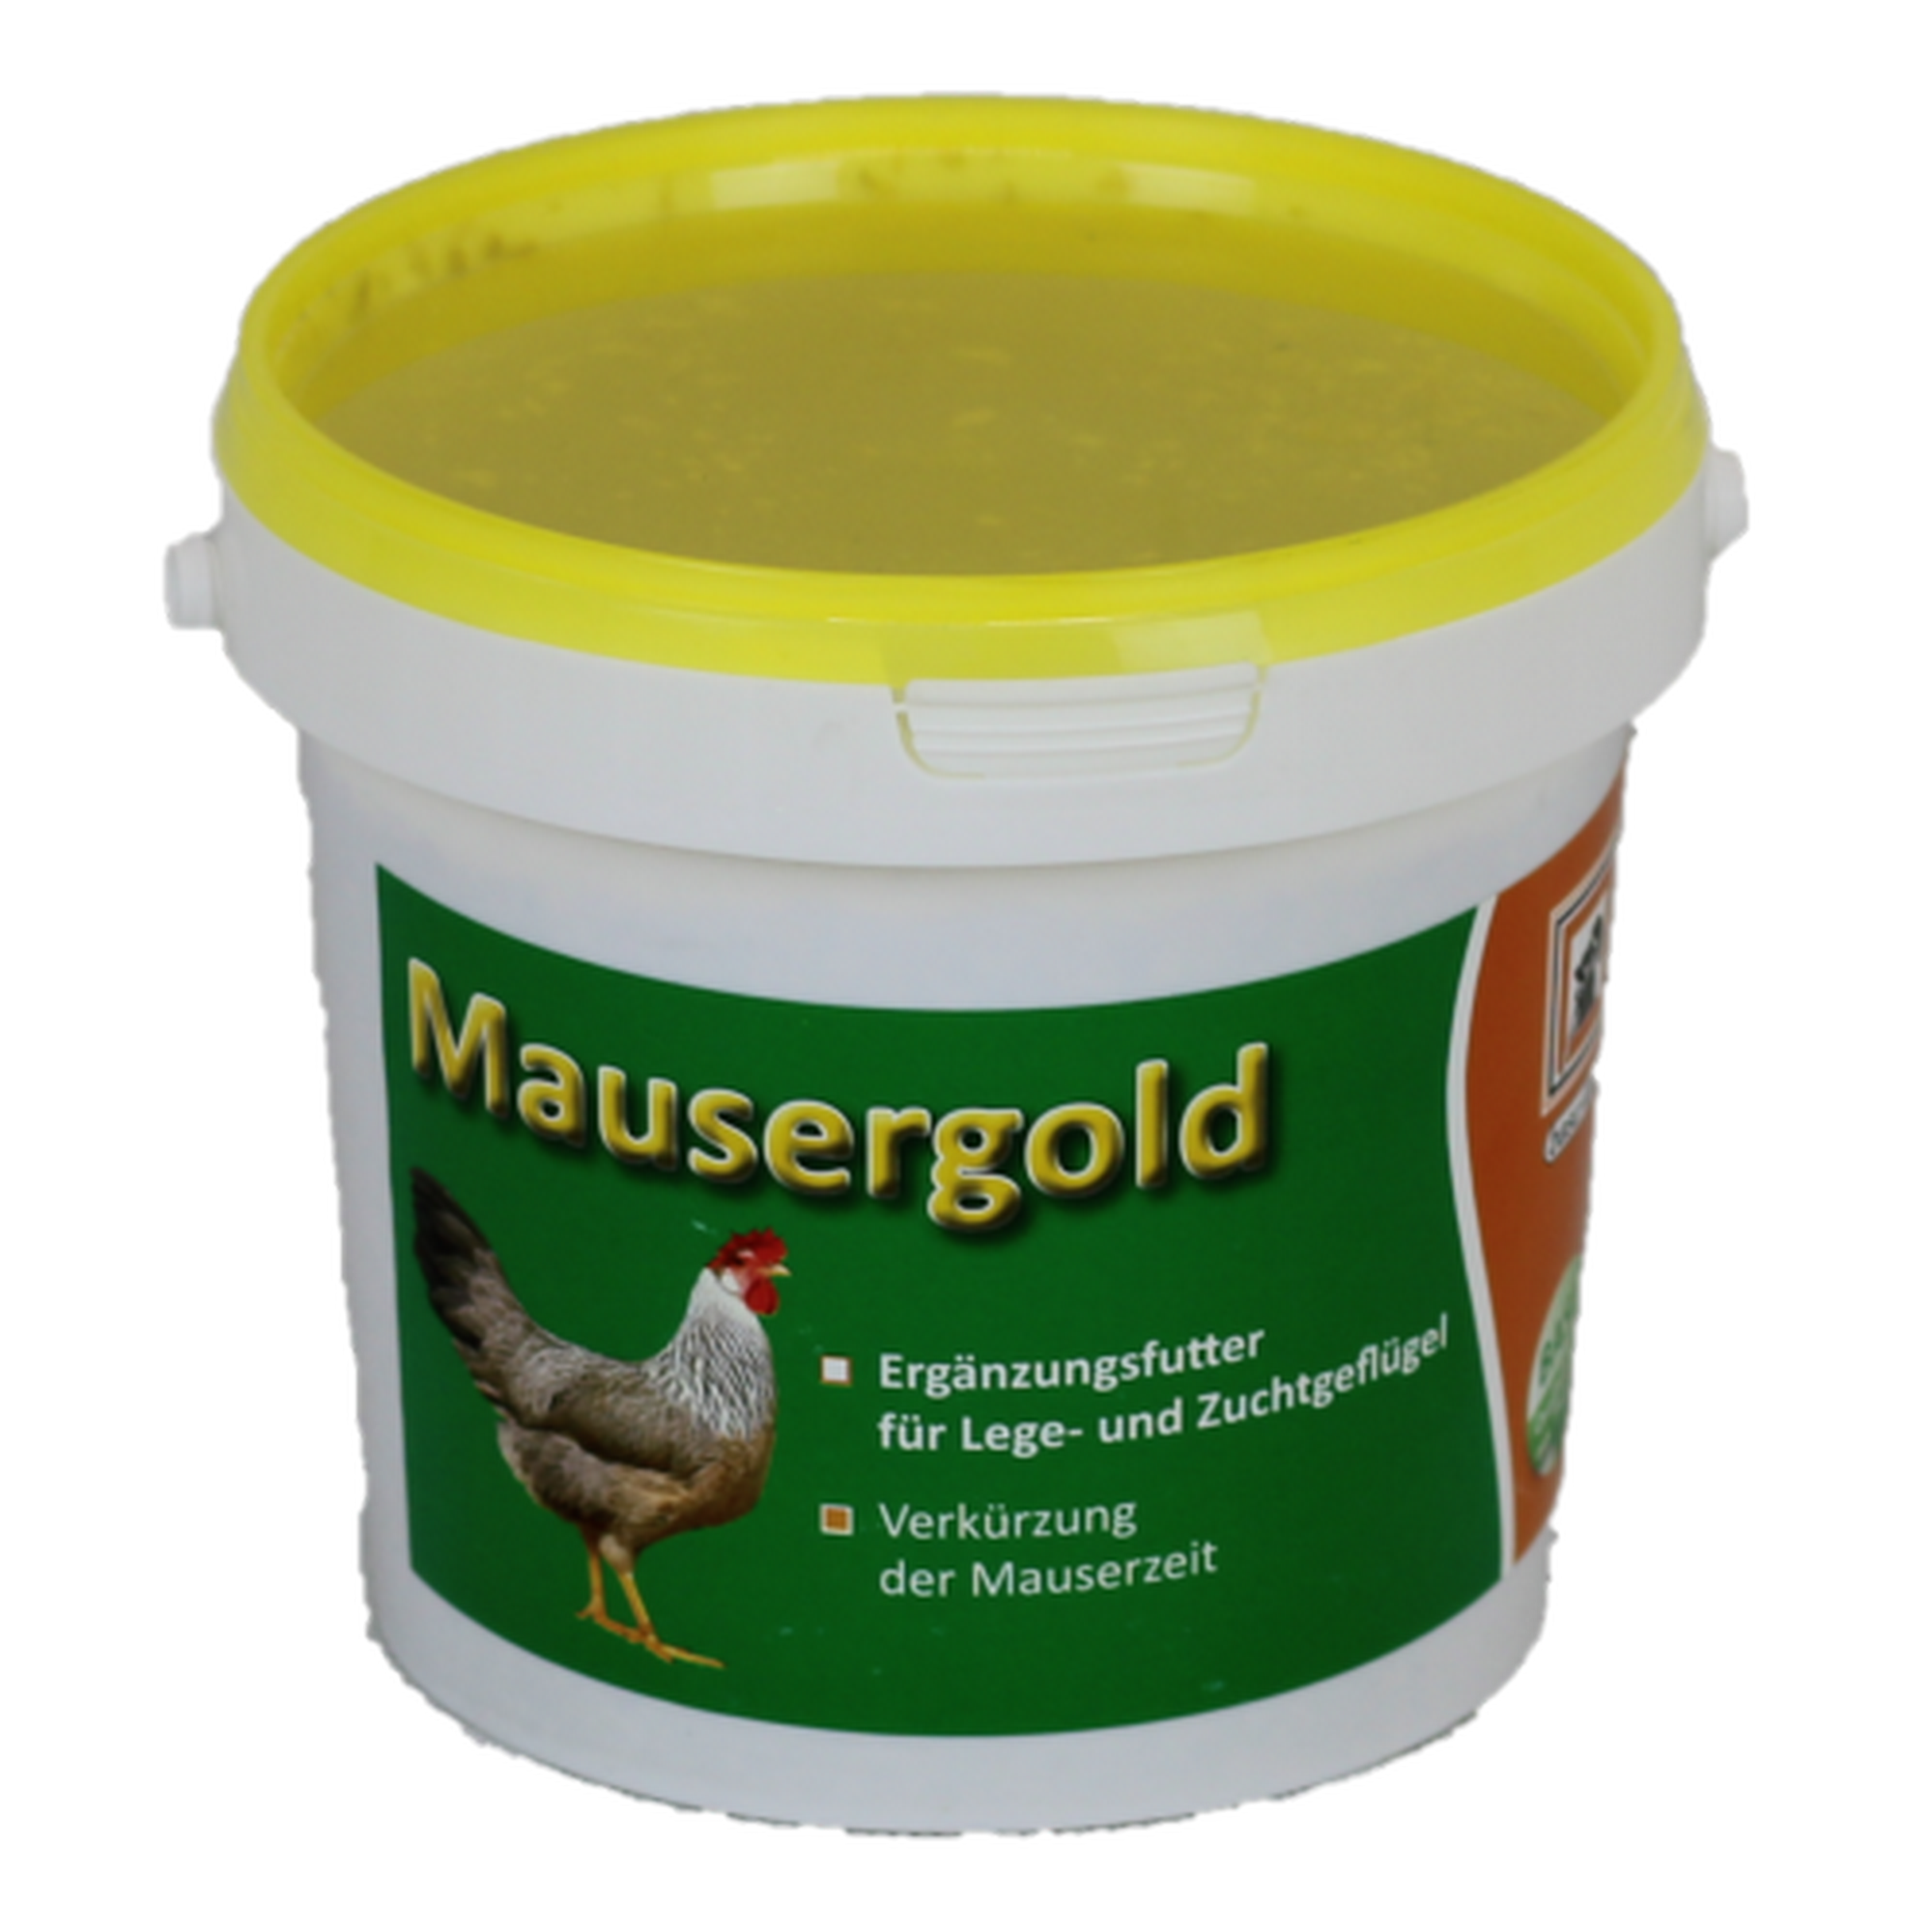 Mineralfutter 'Mausergold' 800 g + product picture